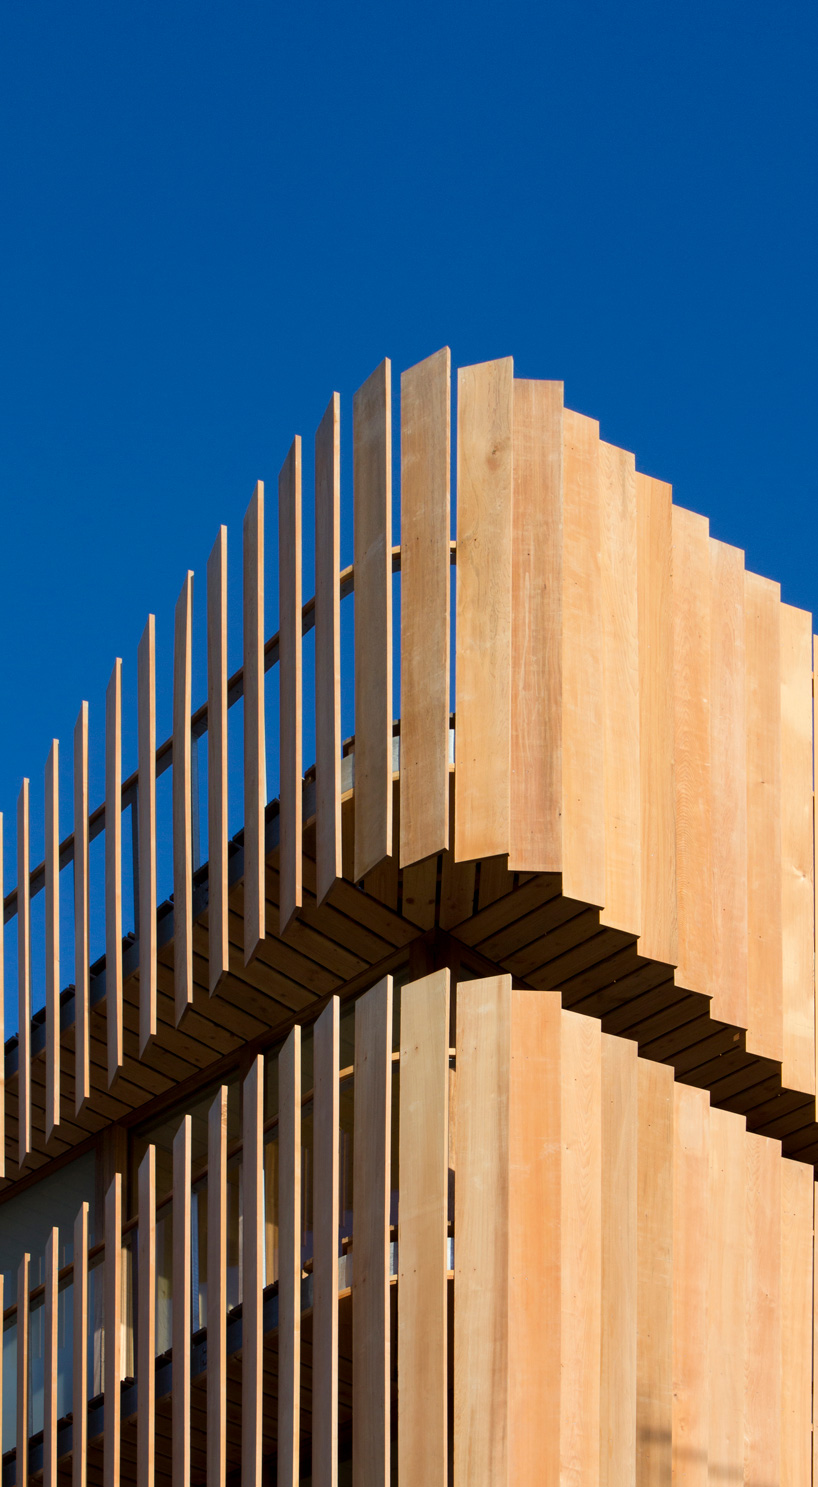 GG-loop clads maritime-inspired apartment complex in waves of wooden slats designboom freebooter